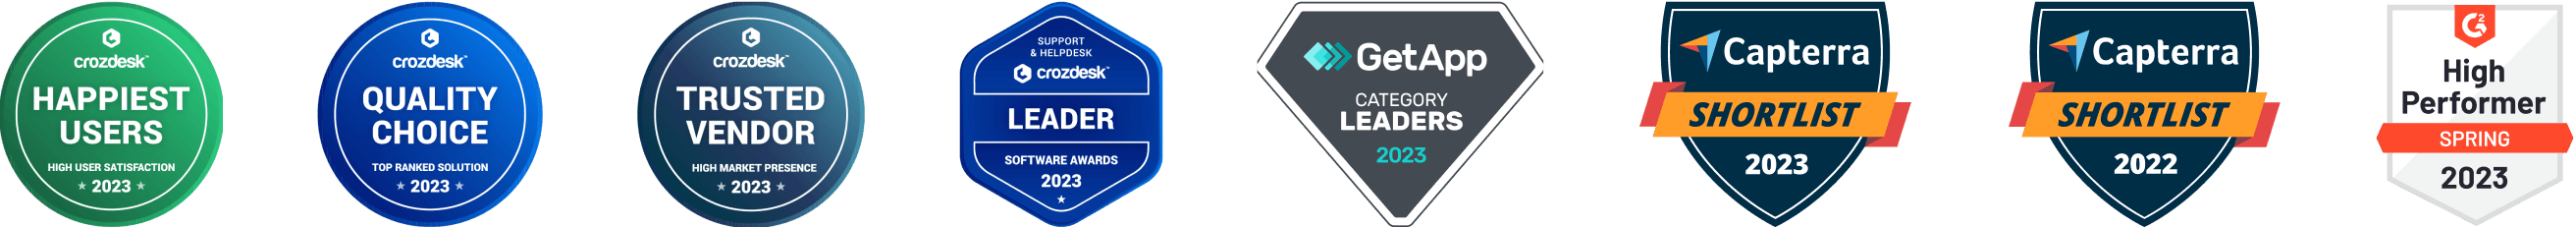 HelpDesk's awards: Happiest Users in 2023 in Crozdesk, Quality Choice in 2023 in Crozdesk, Trusted Vendor in 2023 in Crozdesk, Support & Helpdesk Leader in 2023 in Crozdesk, Category Leaders in 2023 in GetApp, Shortlist in 2022 and 2023 in Capterra, and Spring's High Performer in 2023 in G2